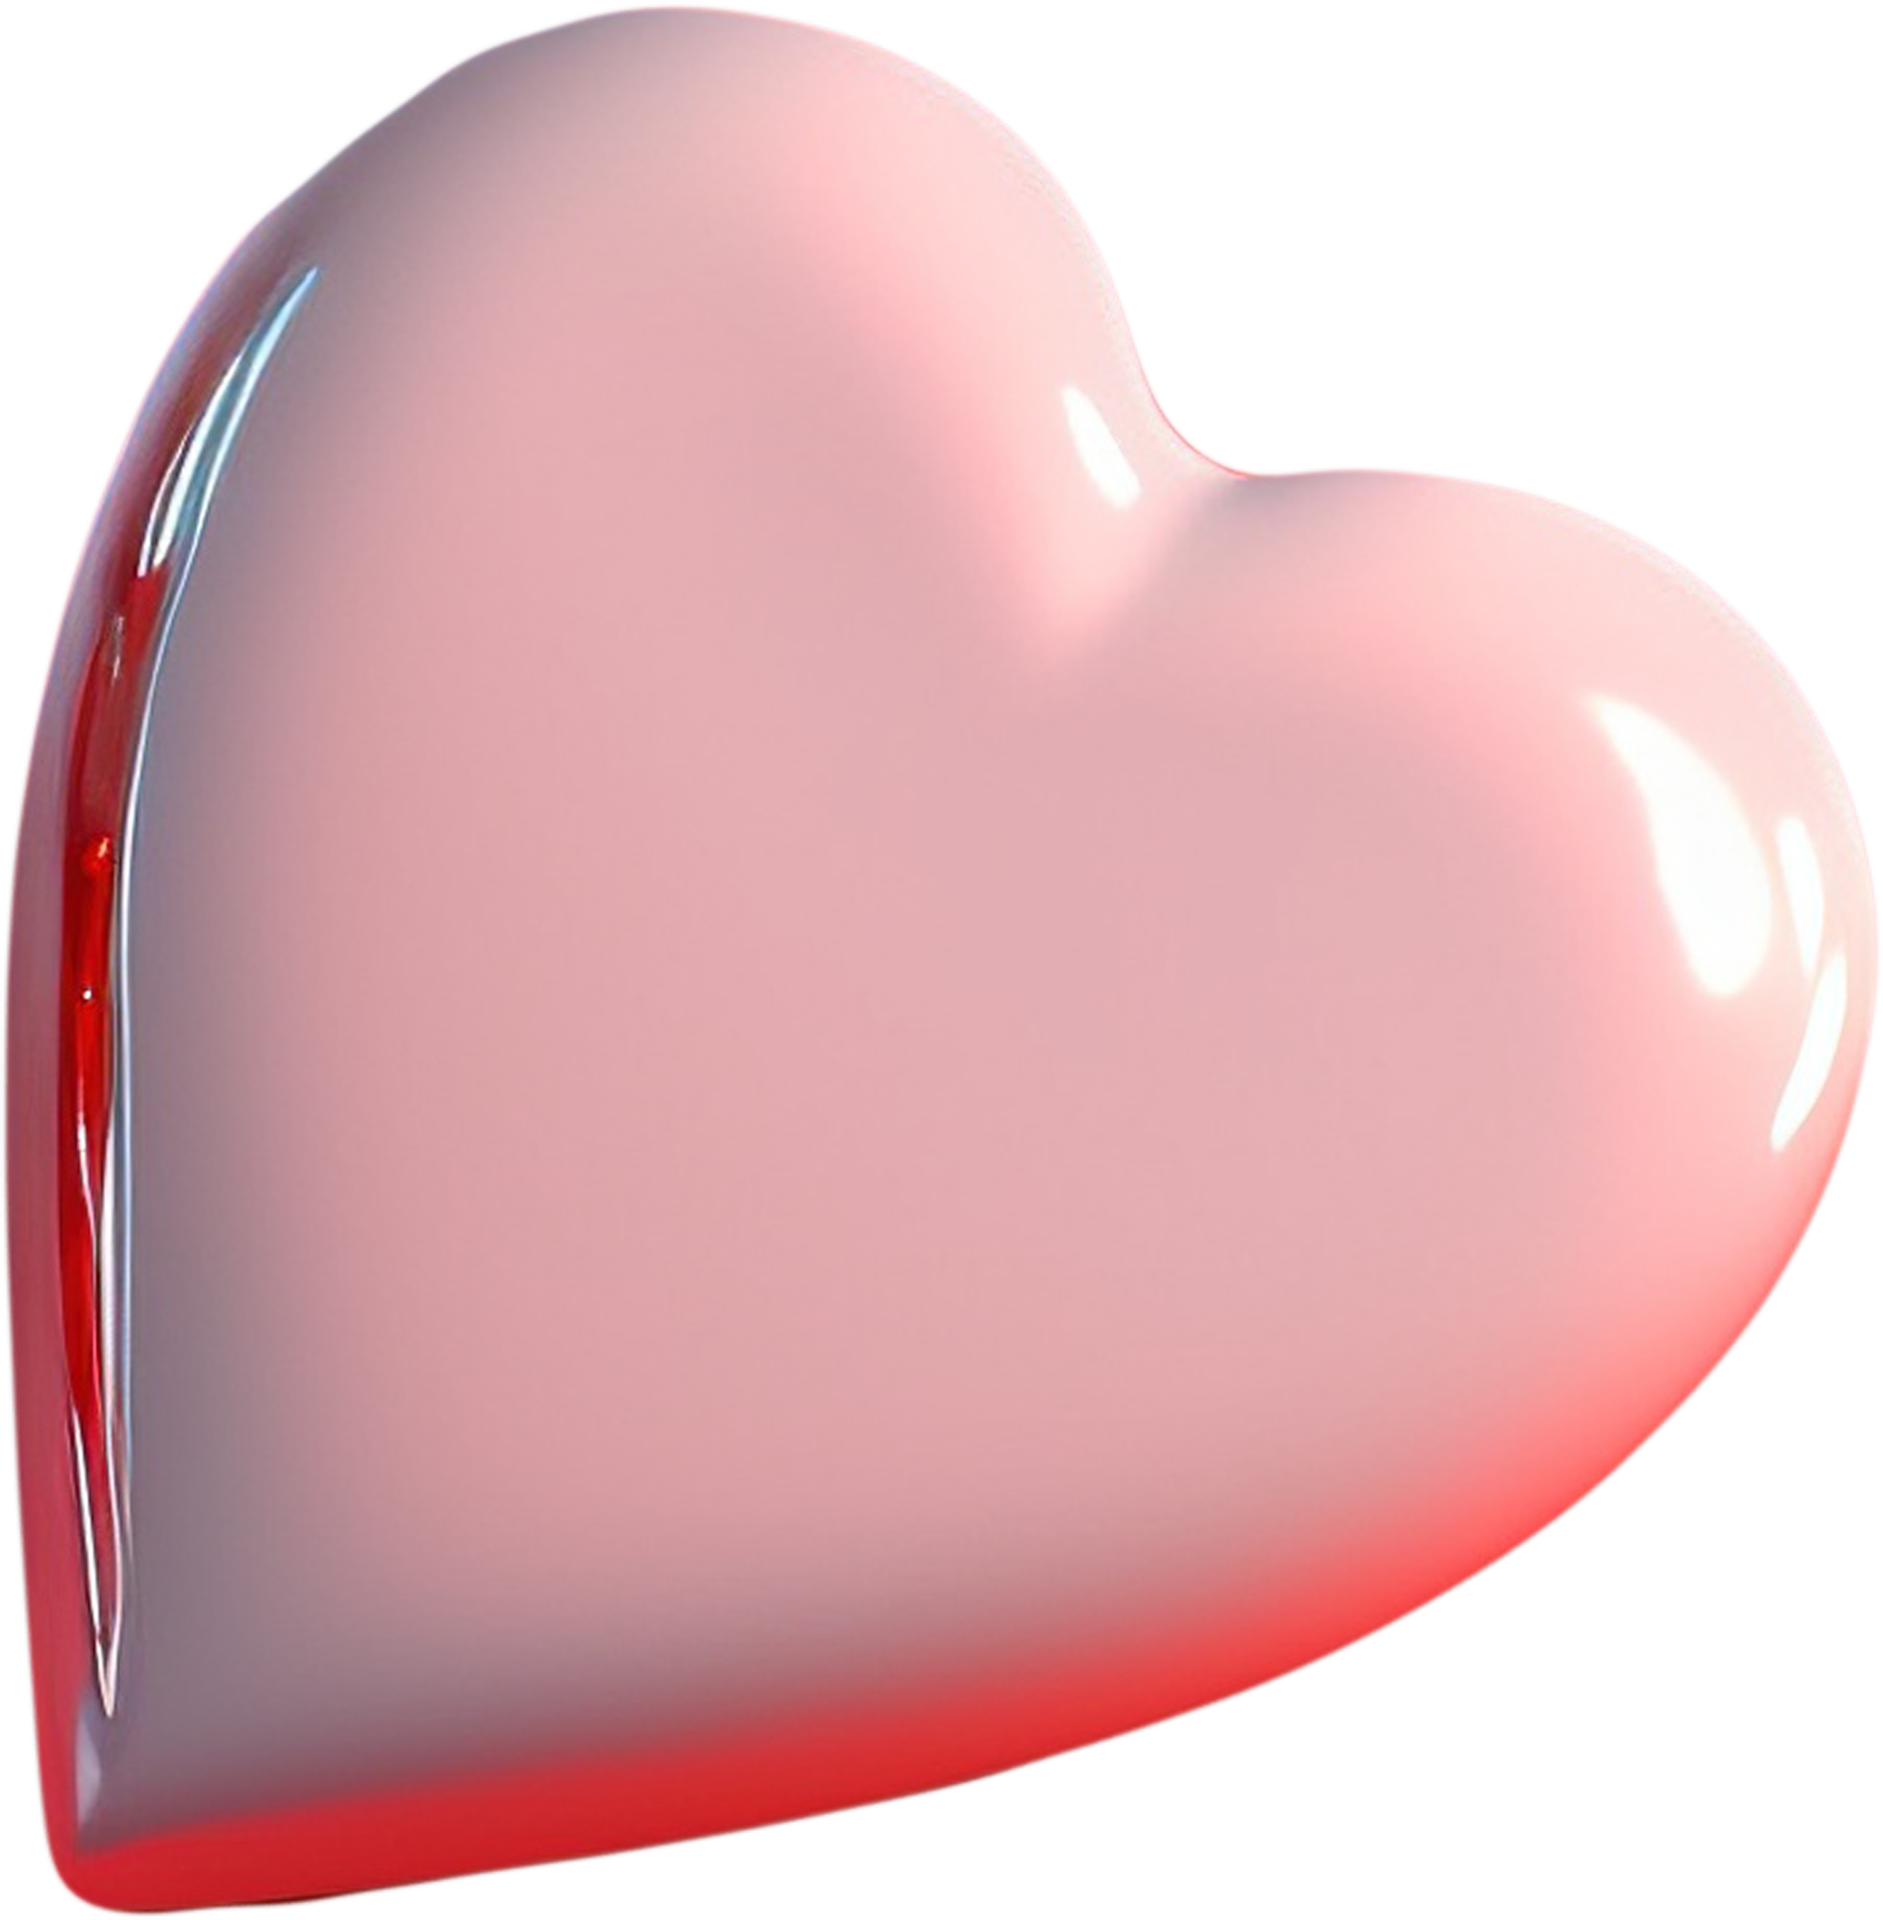 3D shiny heart shape illustration as a symbol of love and romance ...